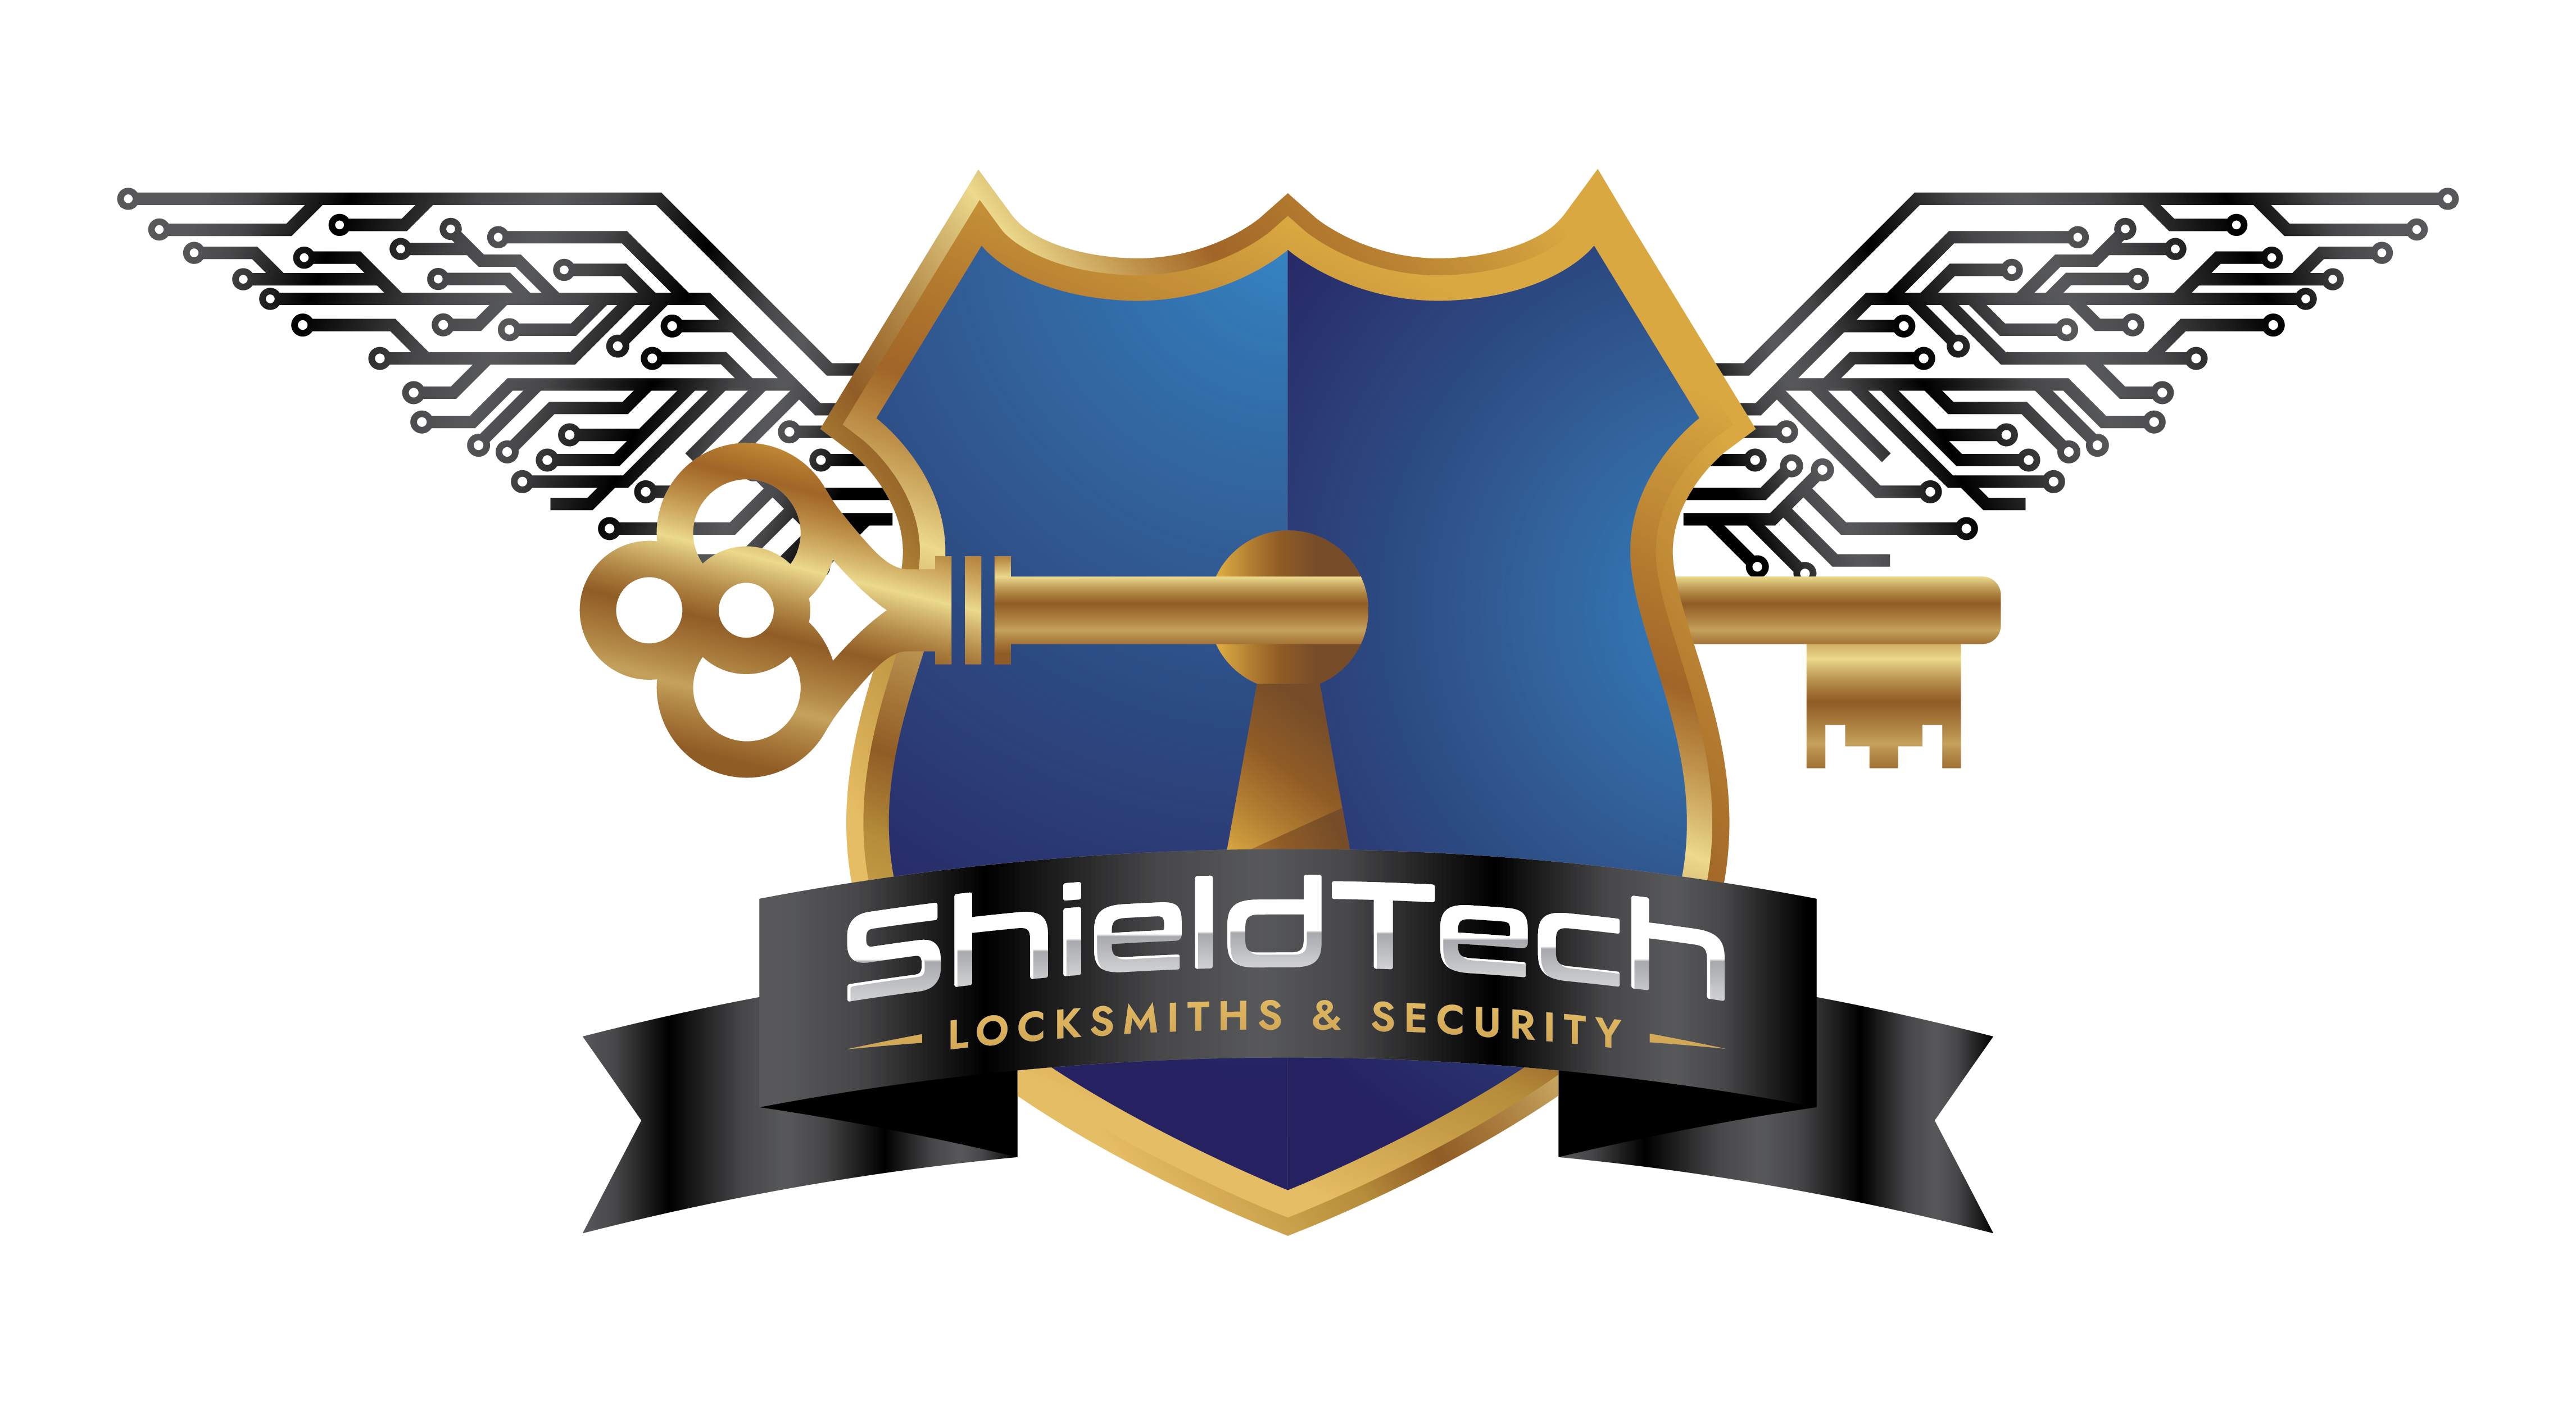 ShieldTech Locksmiths and Security